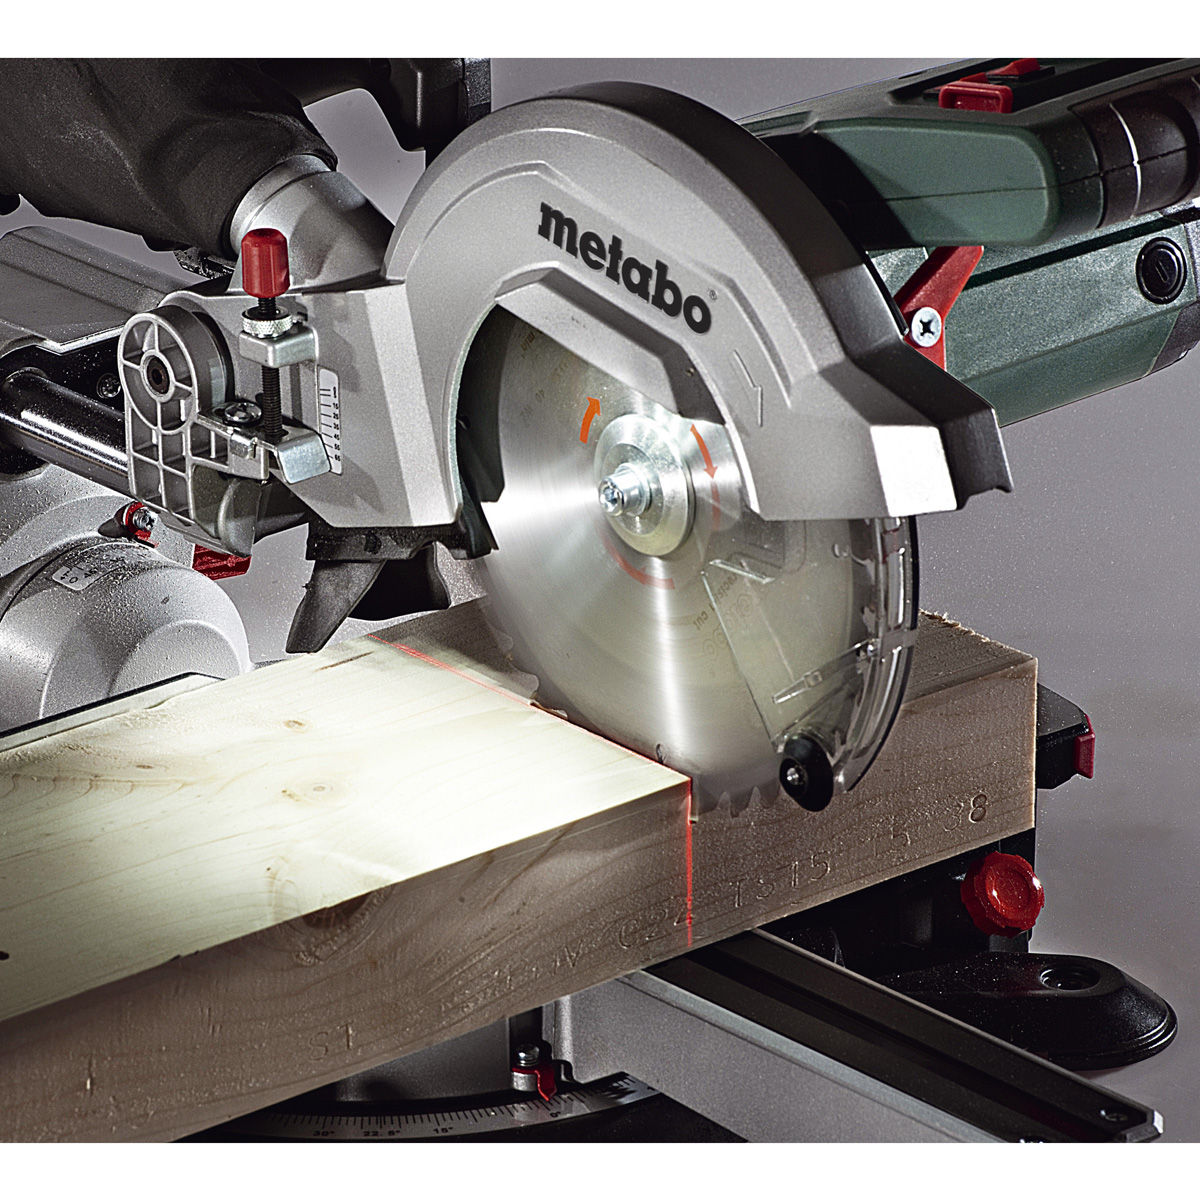 Metabo KGS305M 305mm Sliding Mitre Saw 240V with Universal Wheels Stand